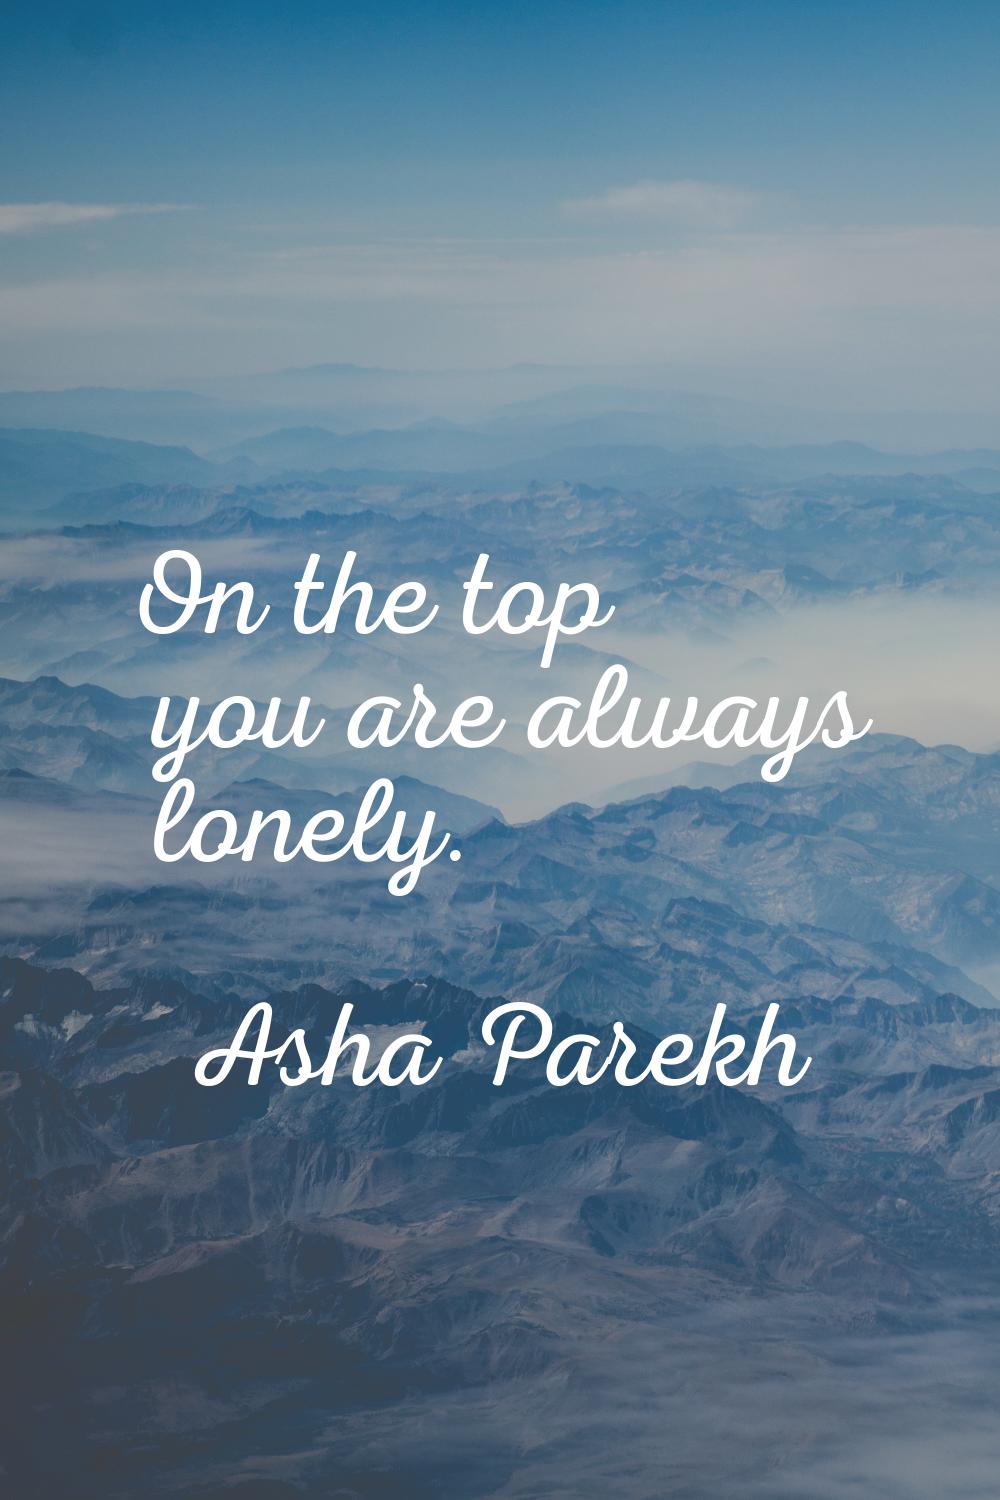 On the top you are always lonely.